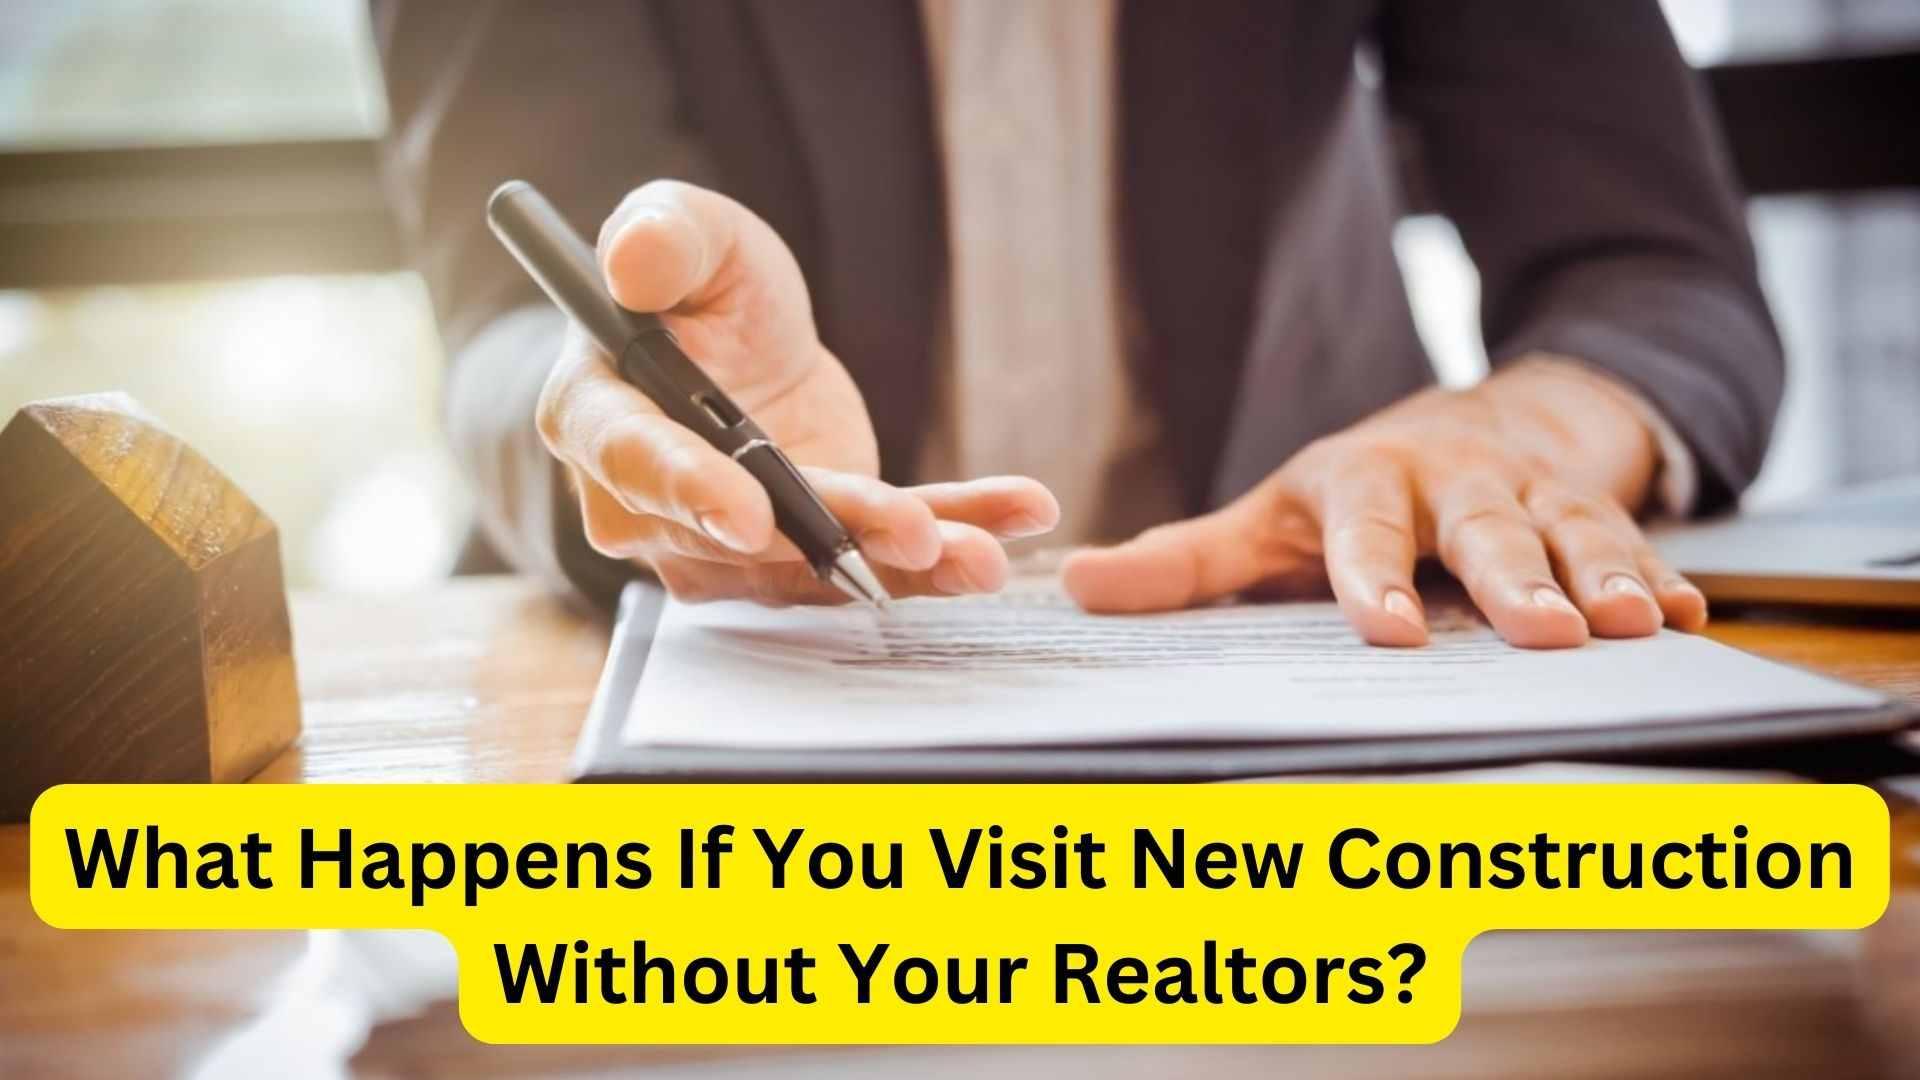 What Happens If You Visit New Construction Without Your Realtors?